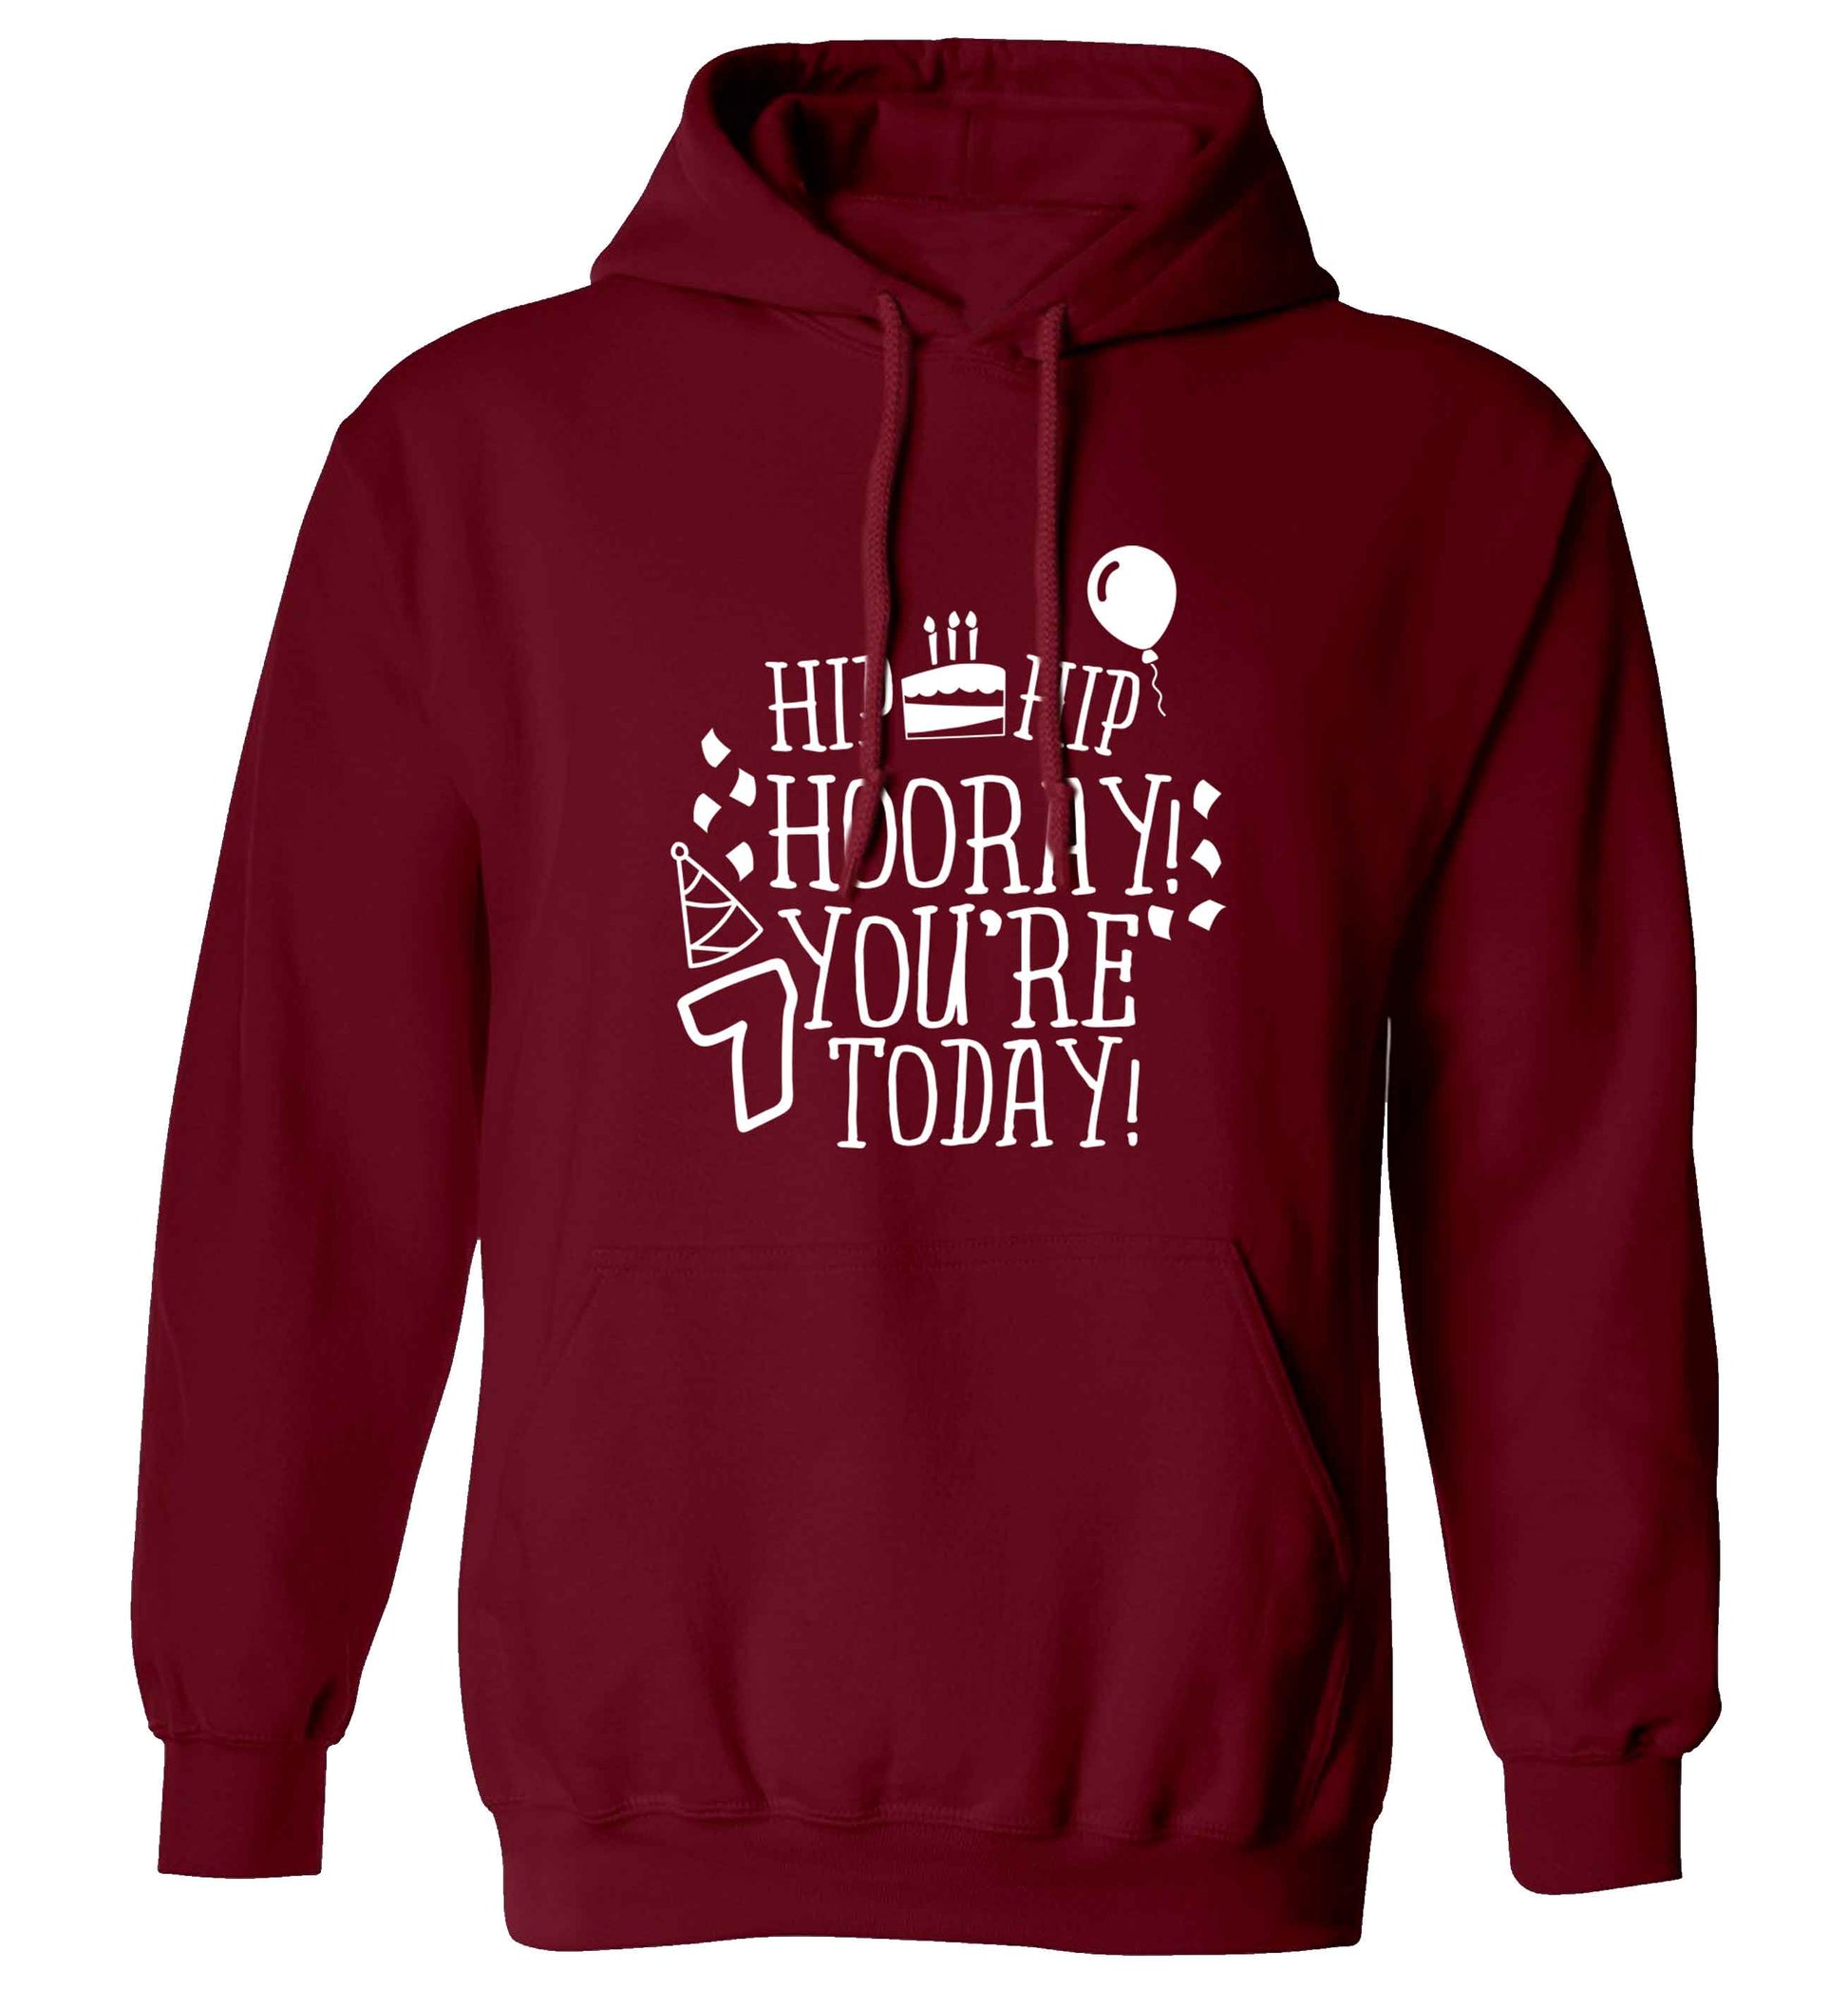 Hip hip hooray you're seven today! adults unisex maroon hoodie 2XL